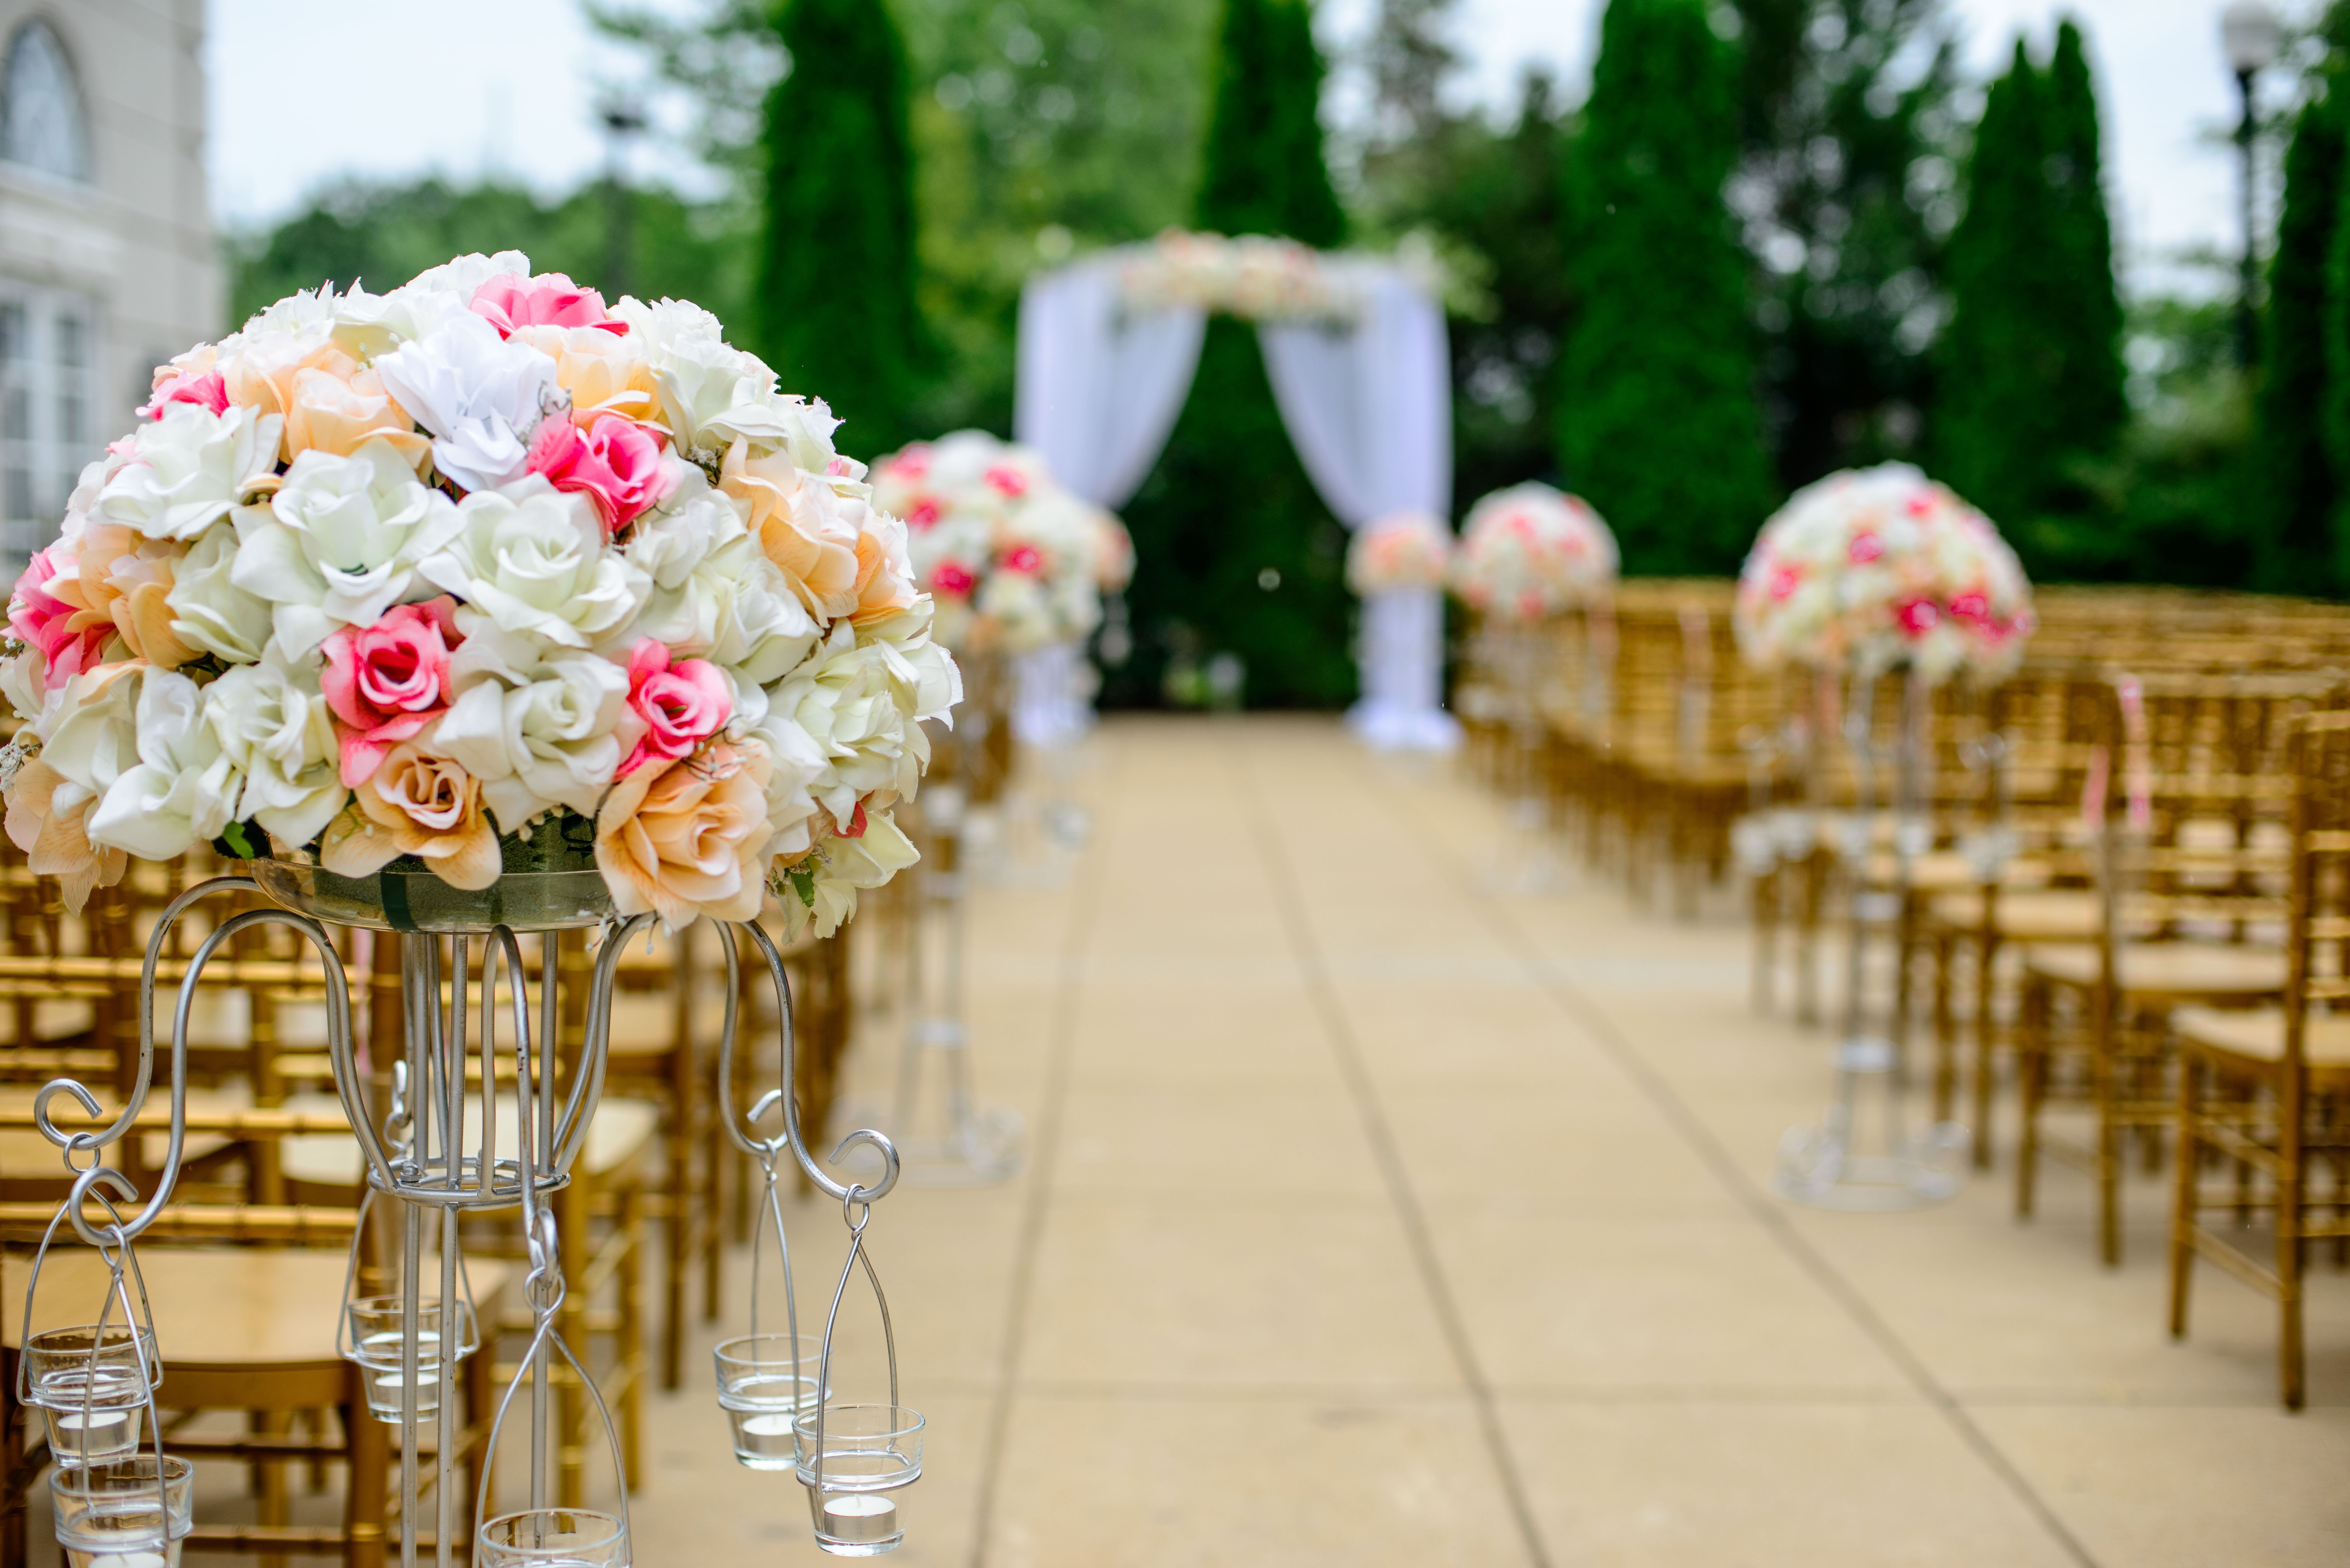 What to Know About Wedding Venue Site Visits